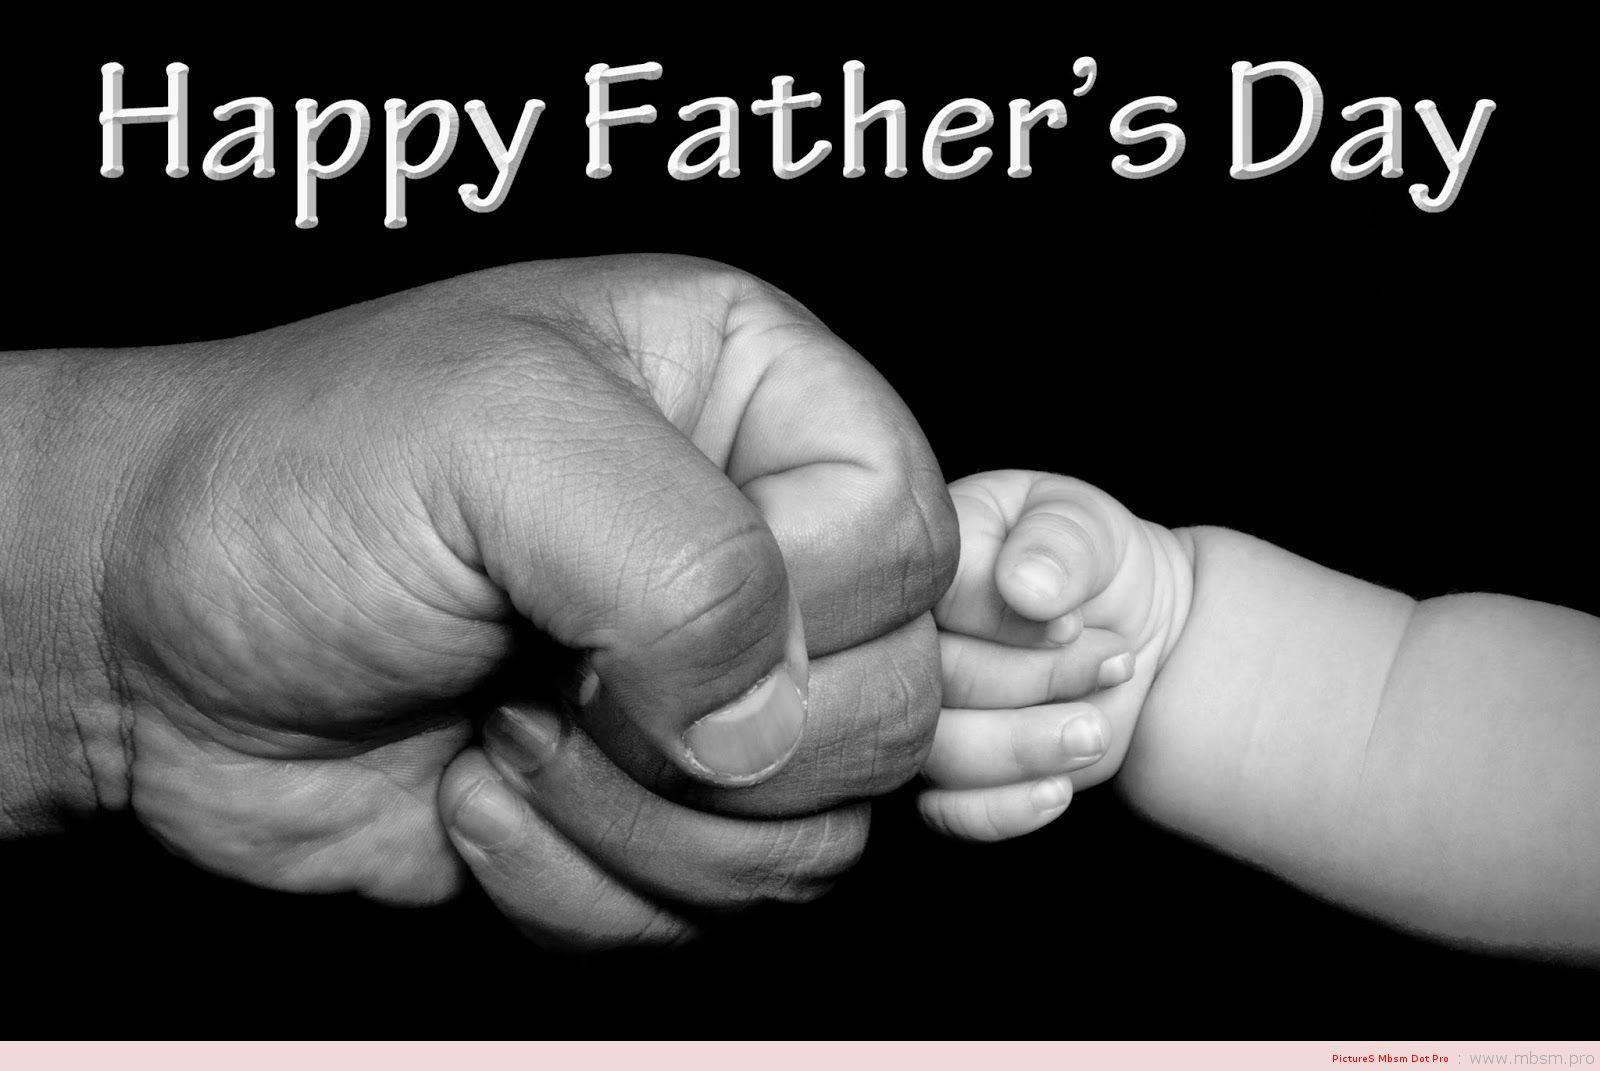 wwwmbsmpro--fathers-day-celebrate-it-on-the-third-sunday-of-june-mbsm-dot-pro